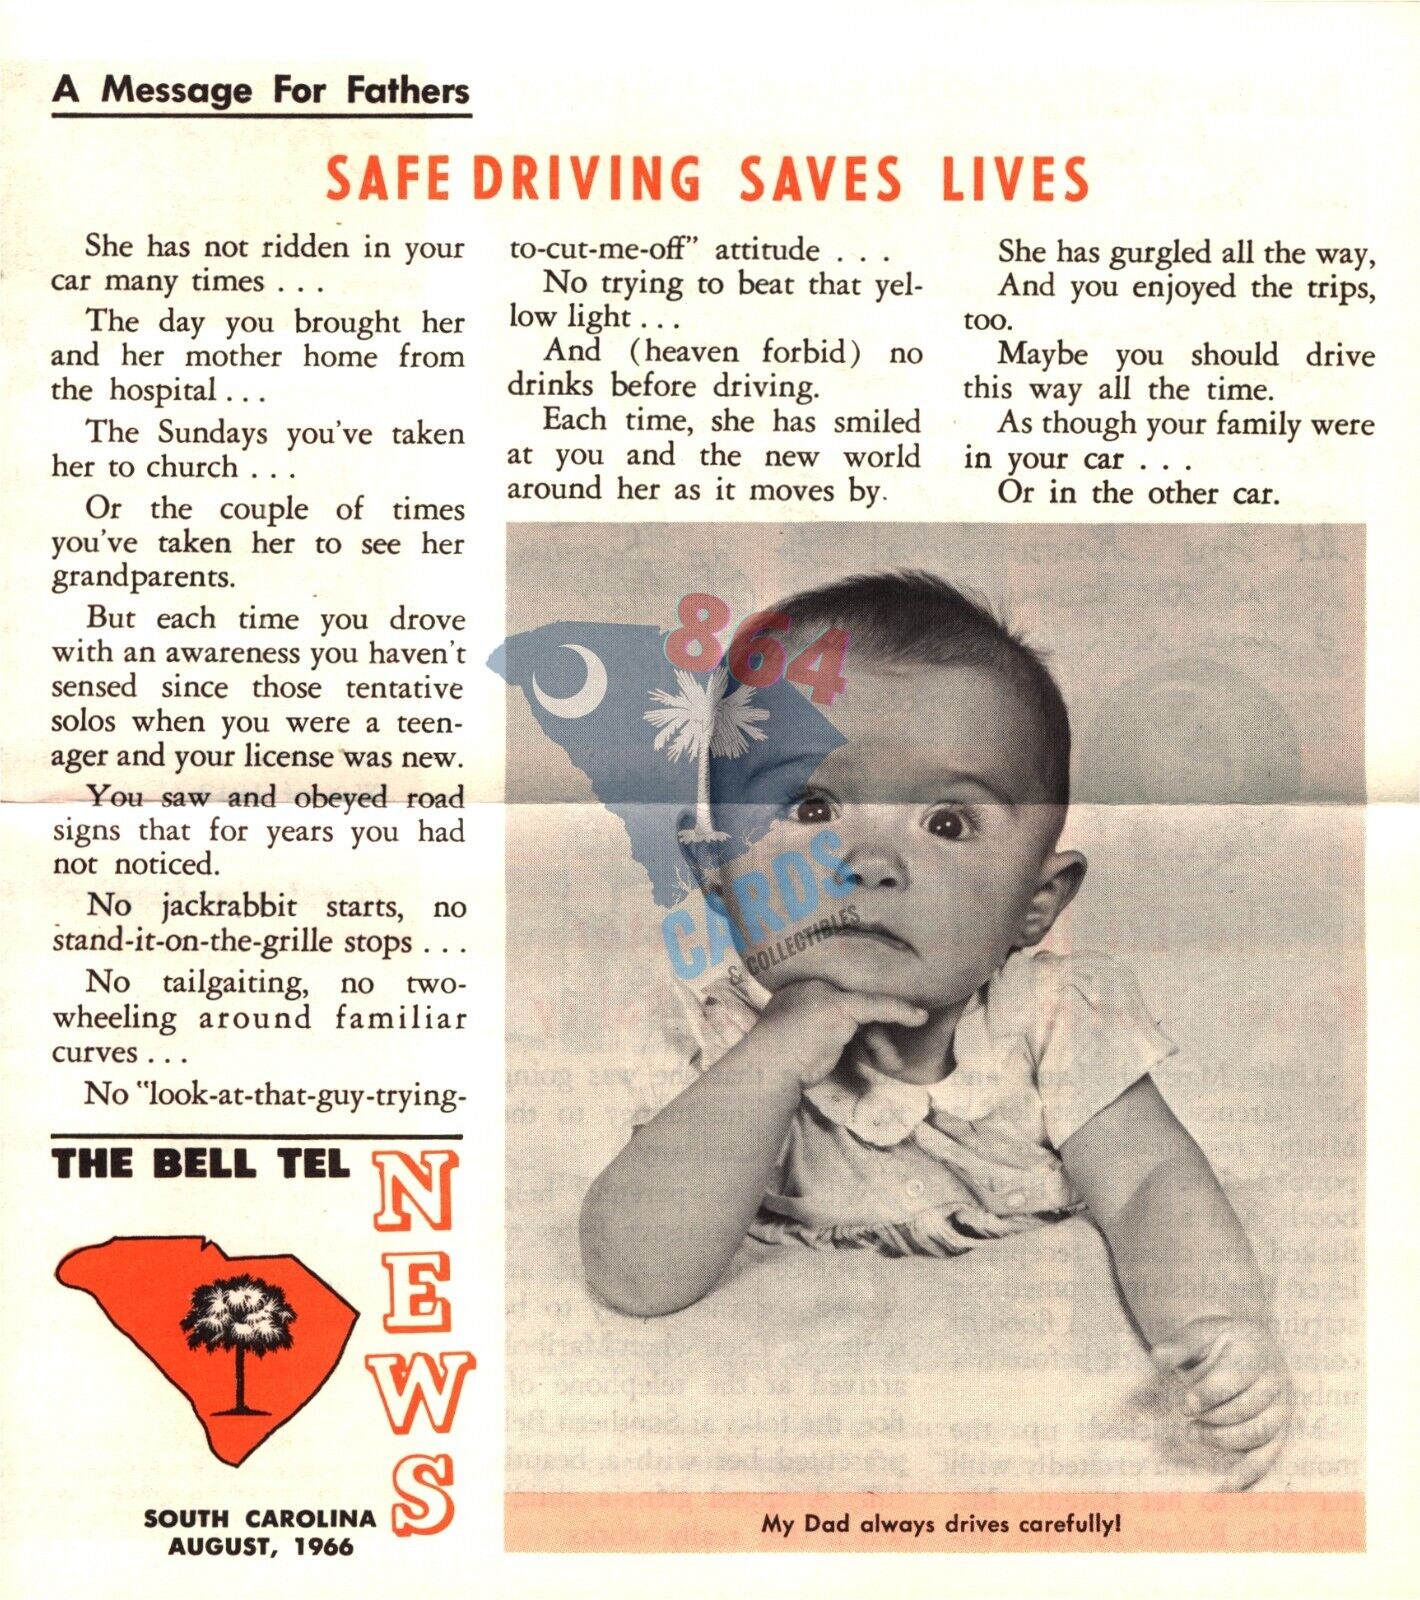 VTG BELL TEL NEWS South Carolina August 1966: Safe Driving Fathers CPR Mouth to